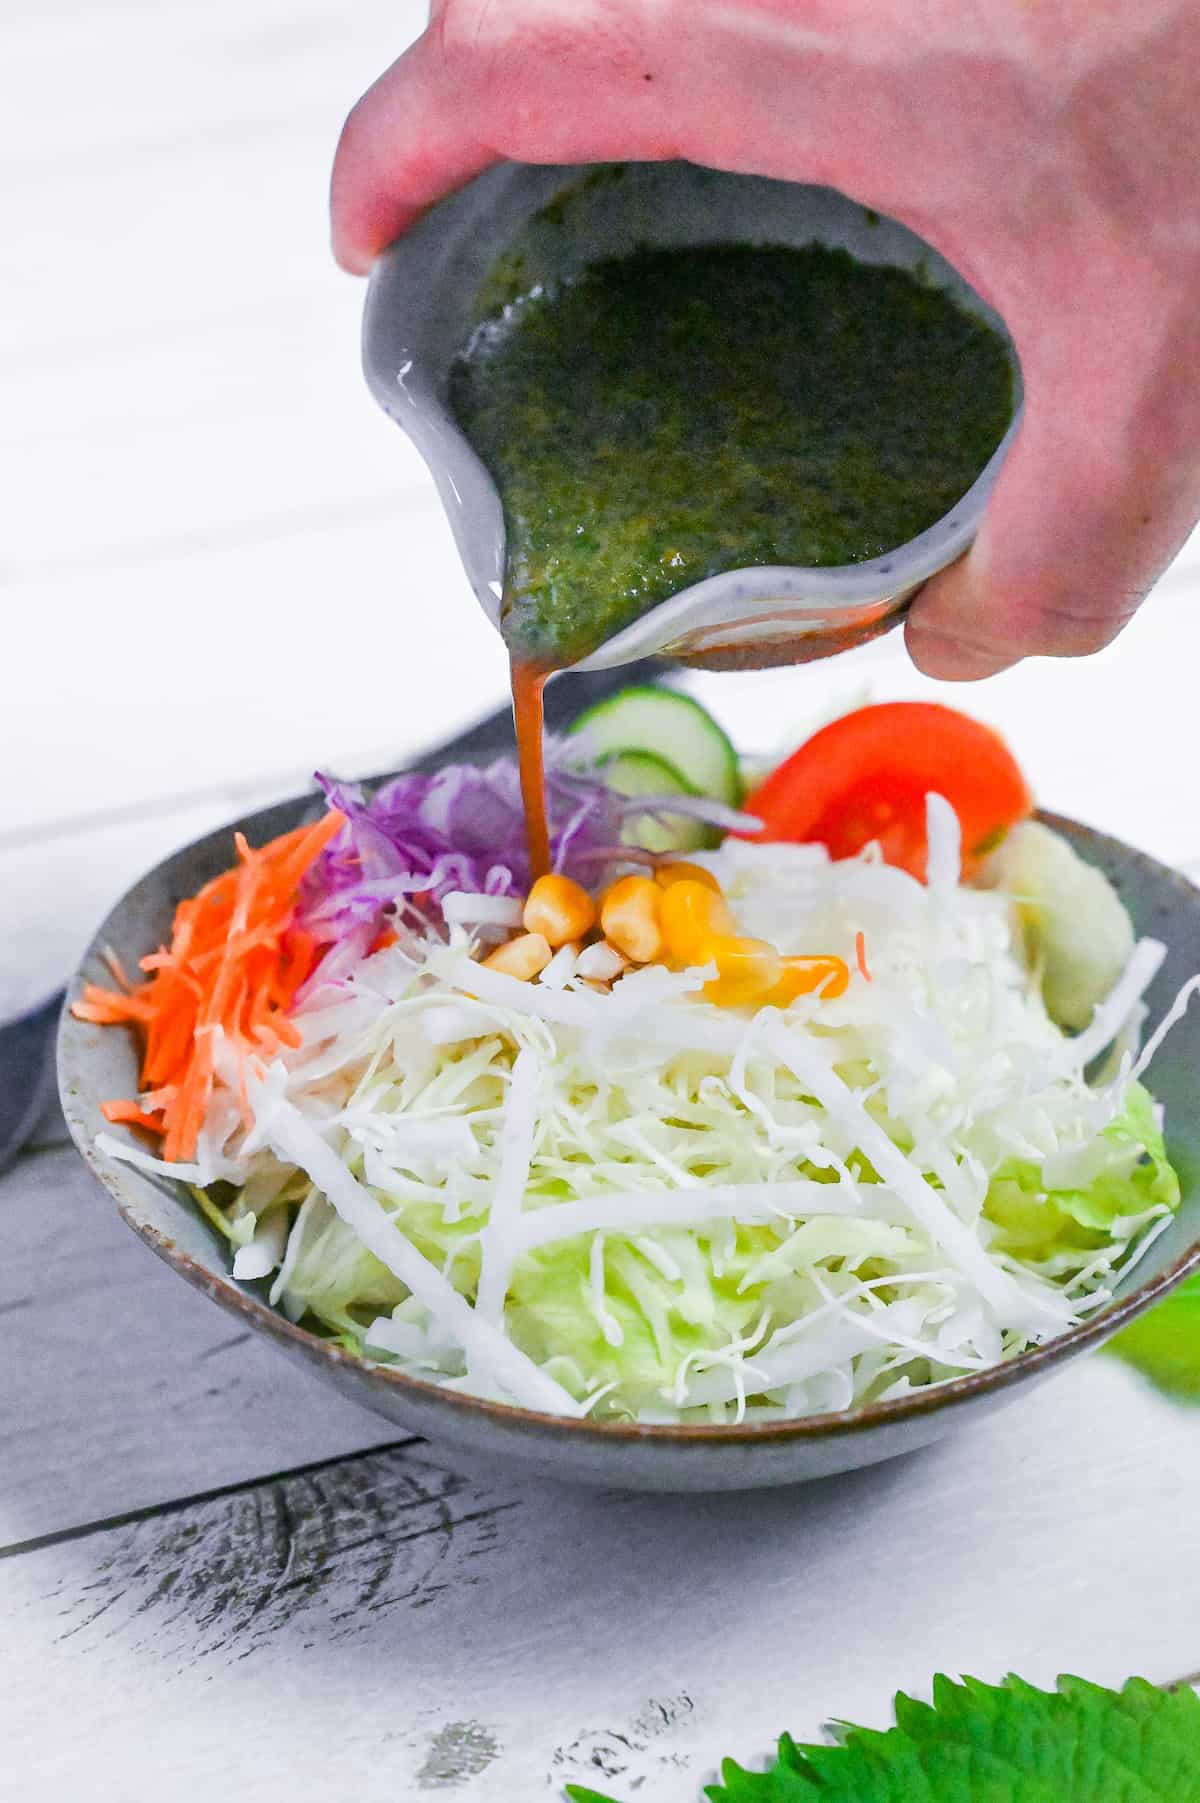 pouring Japanese shiso dressing over a mixed salad of crunchy lettuce, carrots, cucumber, tomato and sweet corn